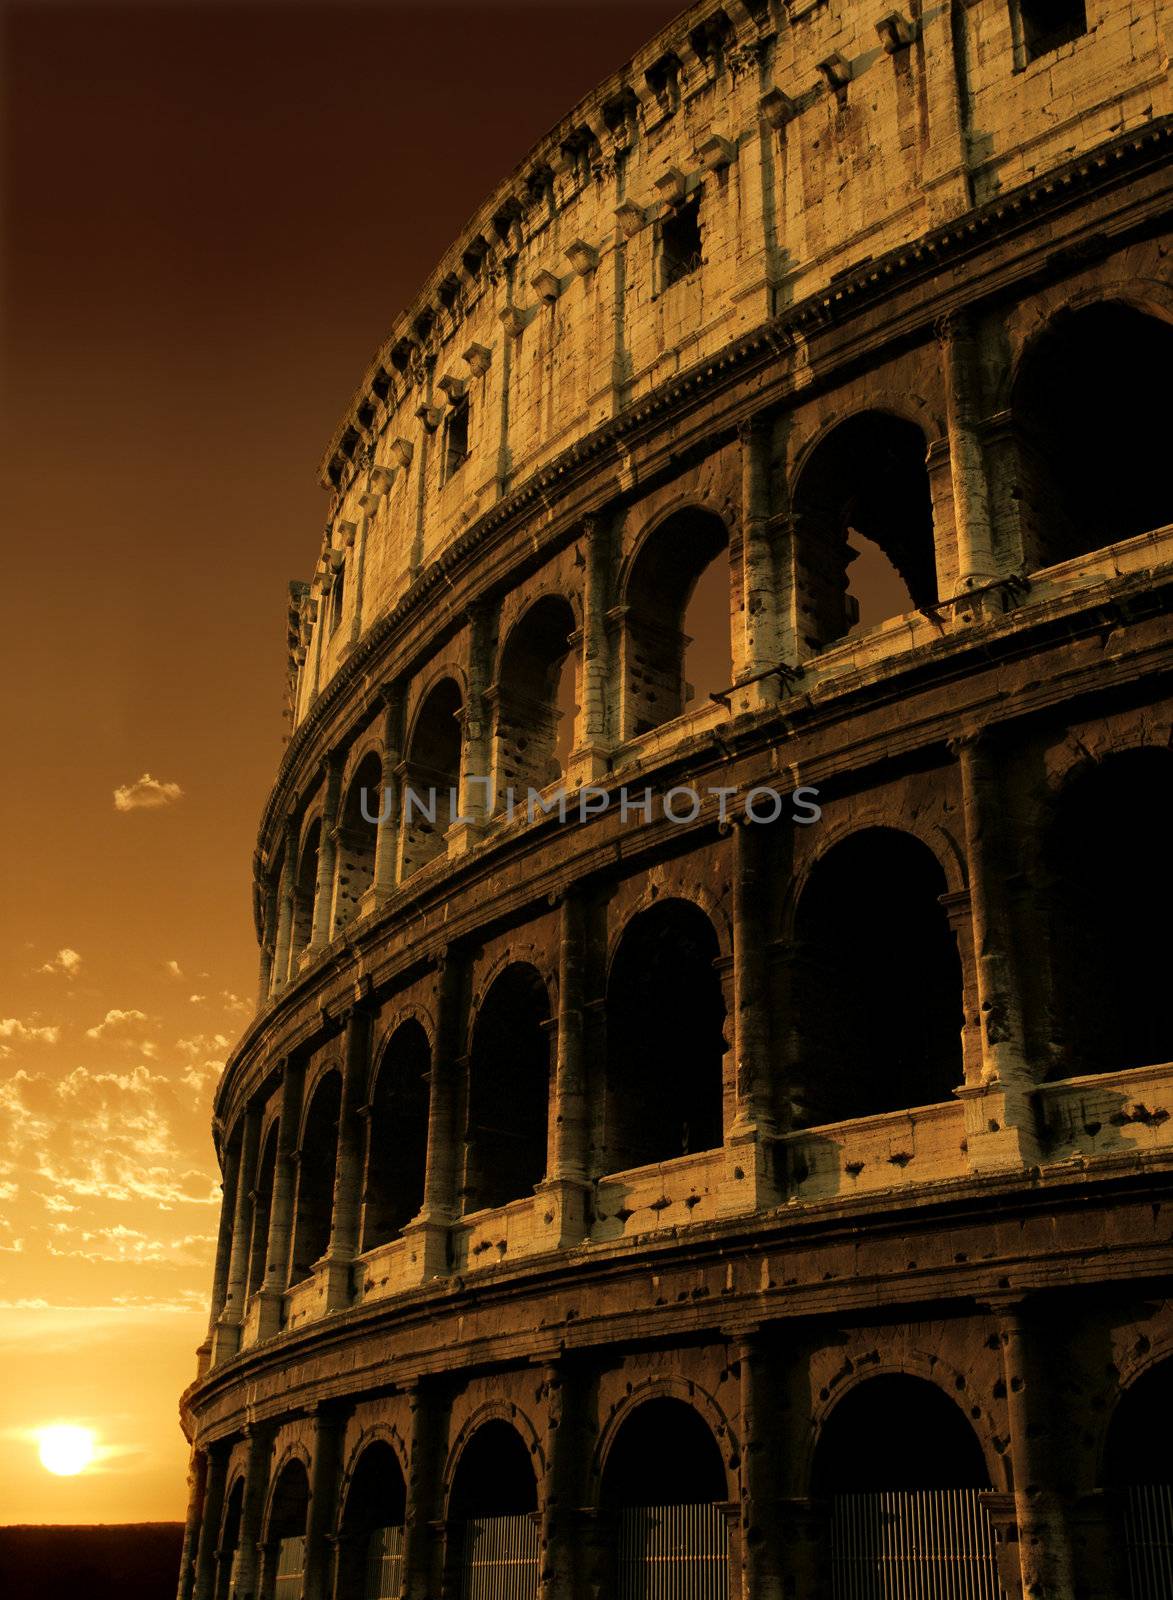 Colosseum sunrise by sumners